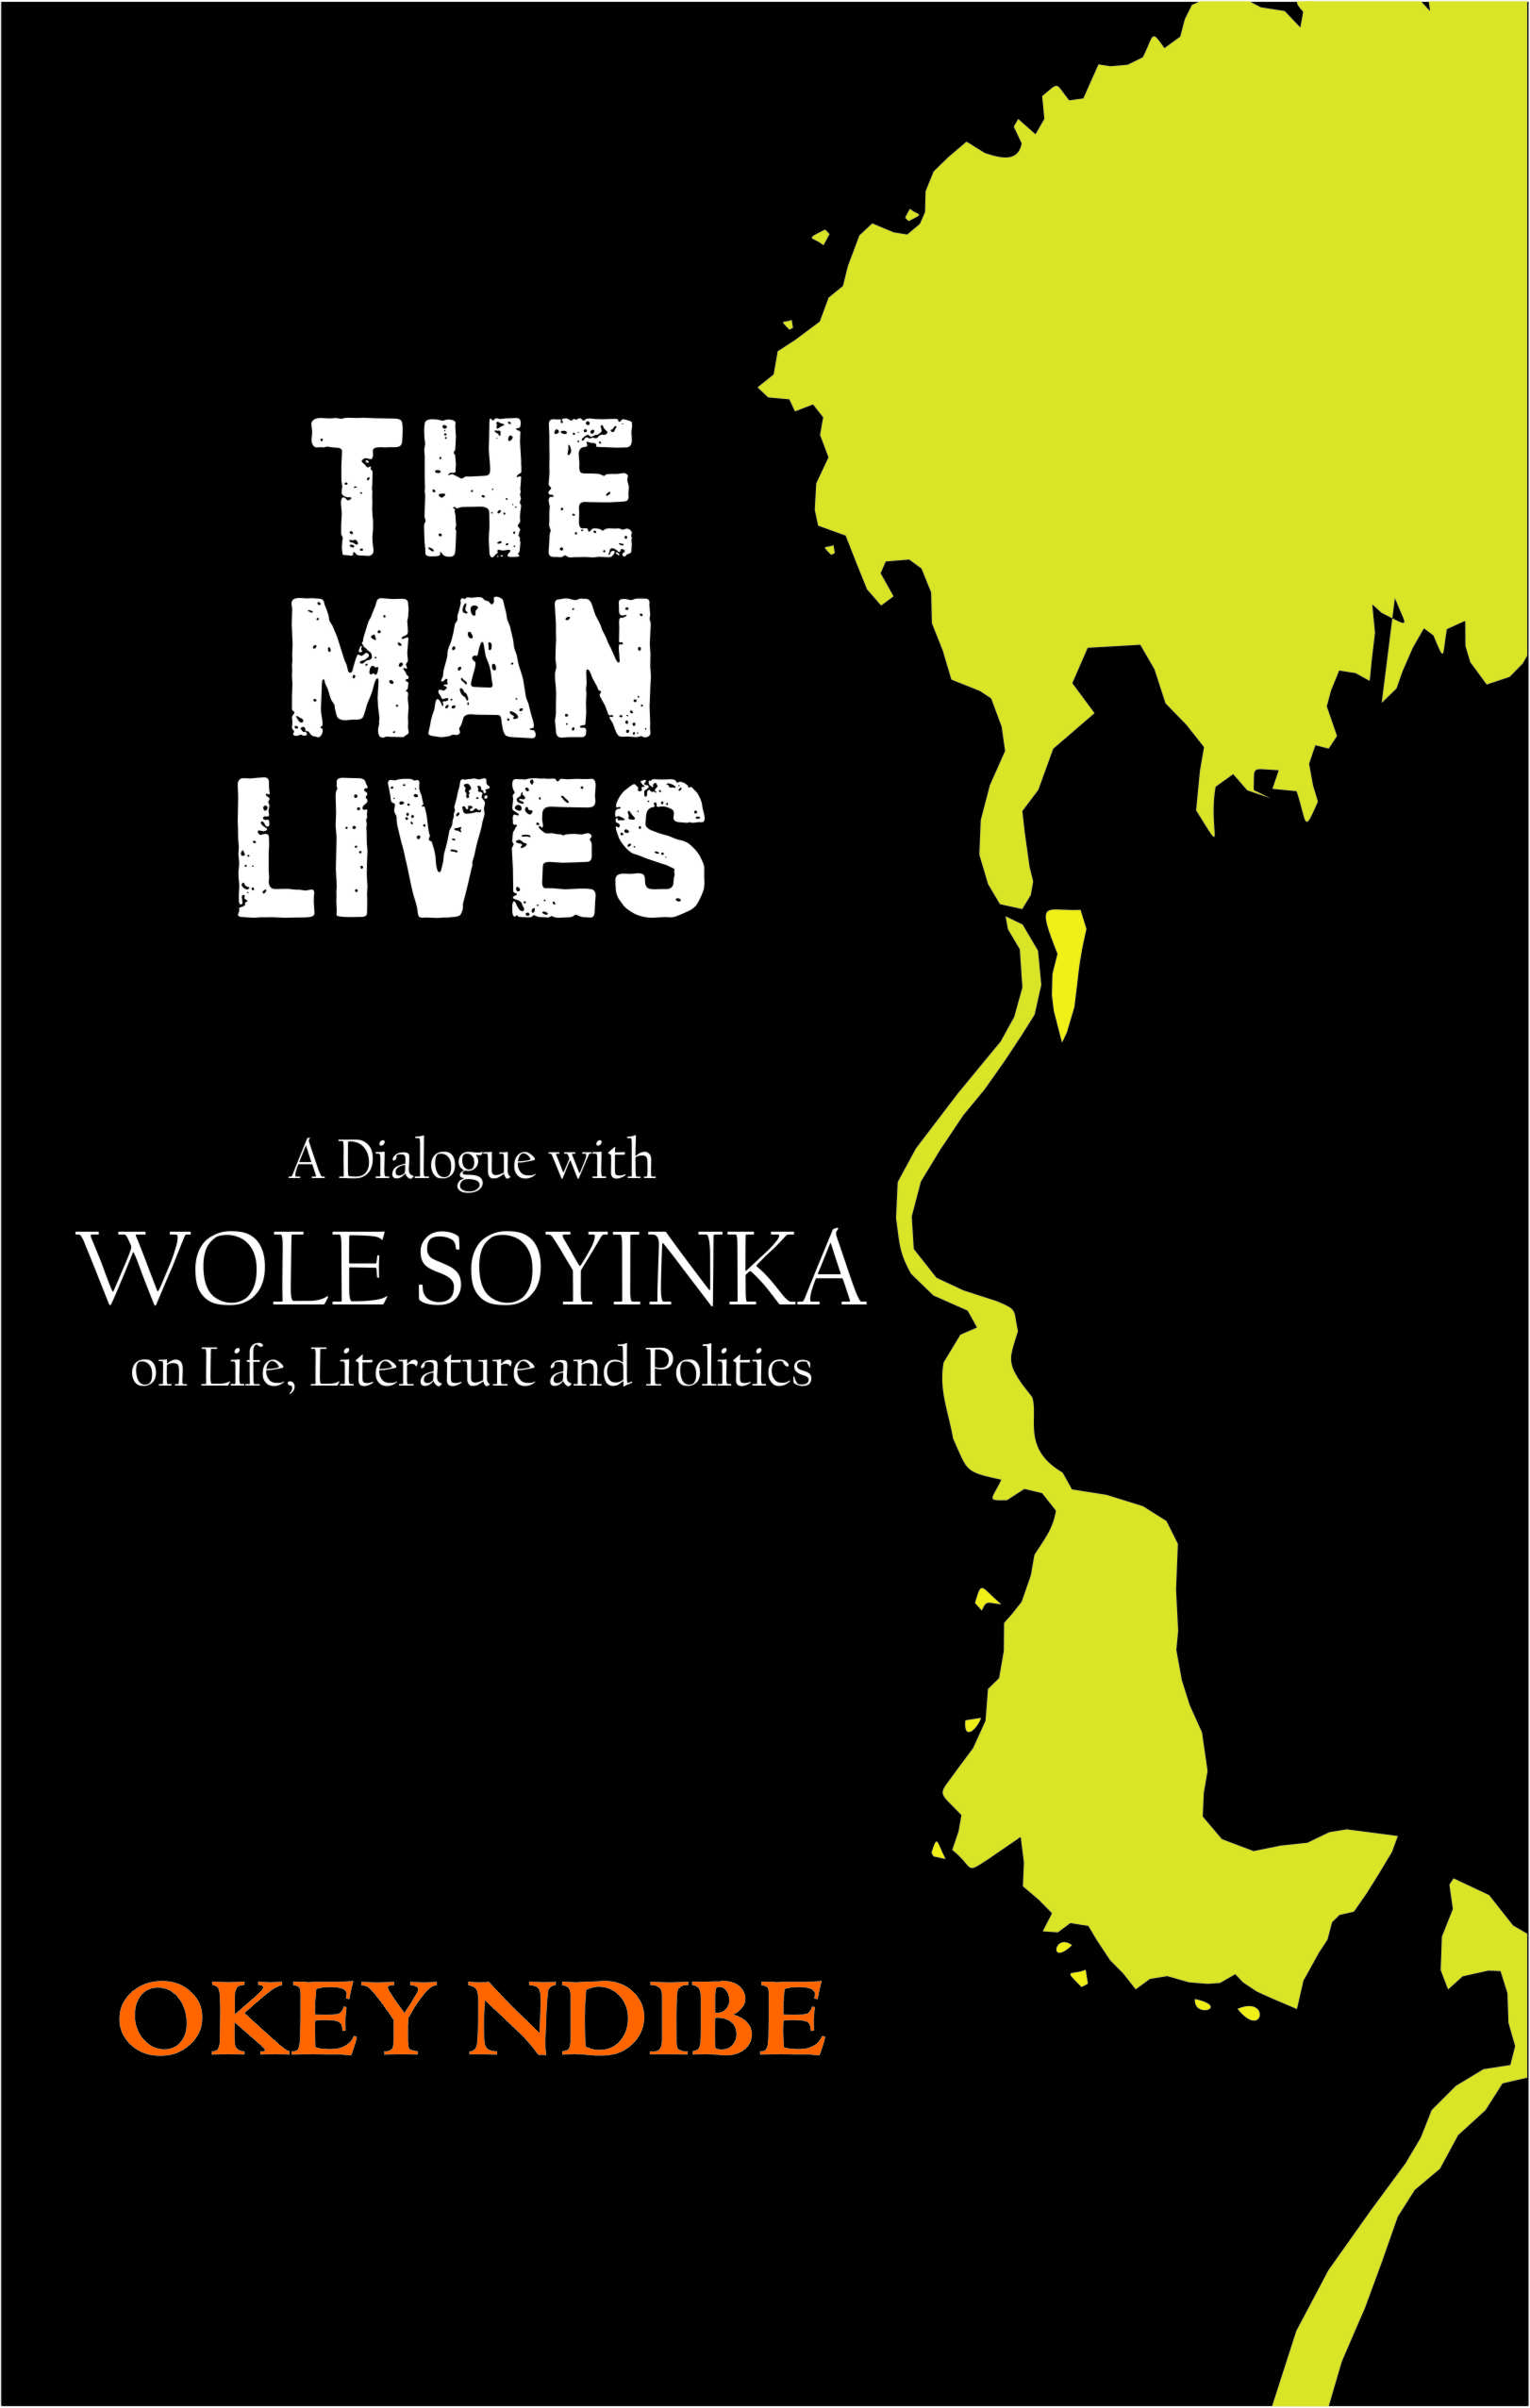 The Man Lives: A Dialogue With Wole Soyinka on Life, Literature and Politics